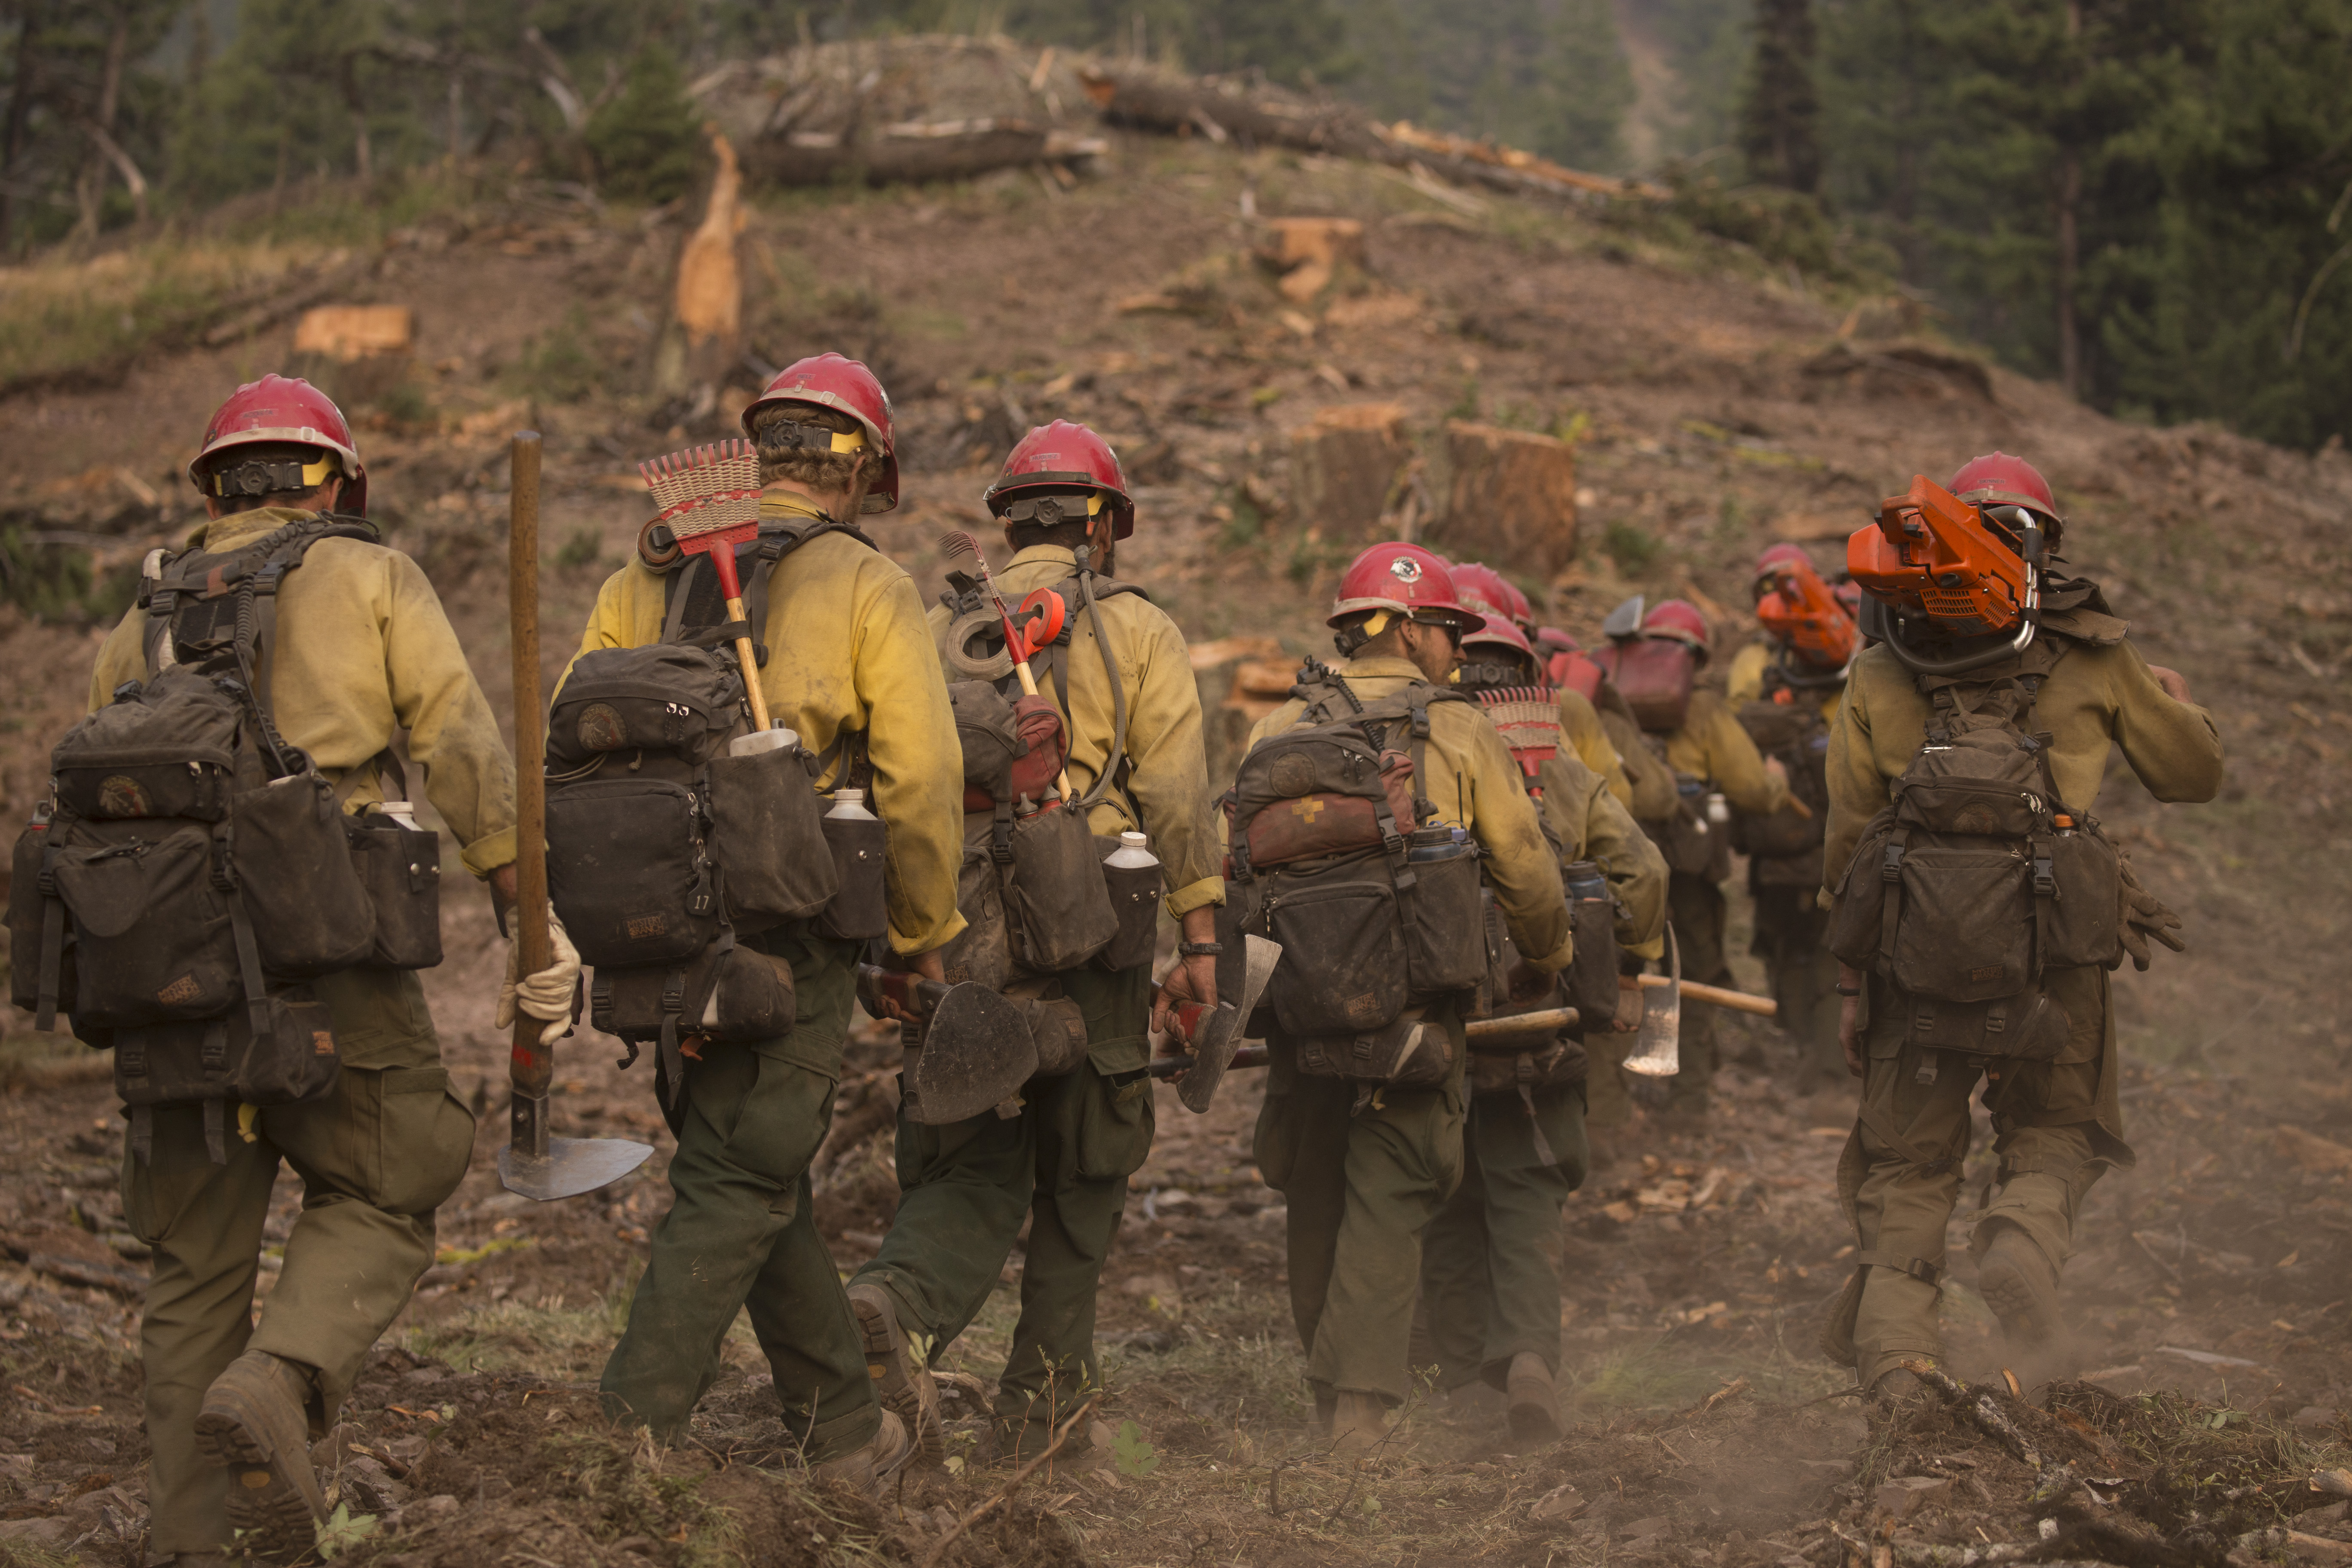 A line of wildland firefighters carrying tools and gear, walking up a slight mountain slope cleared of brush.